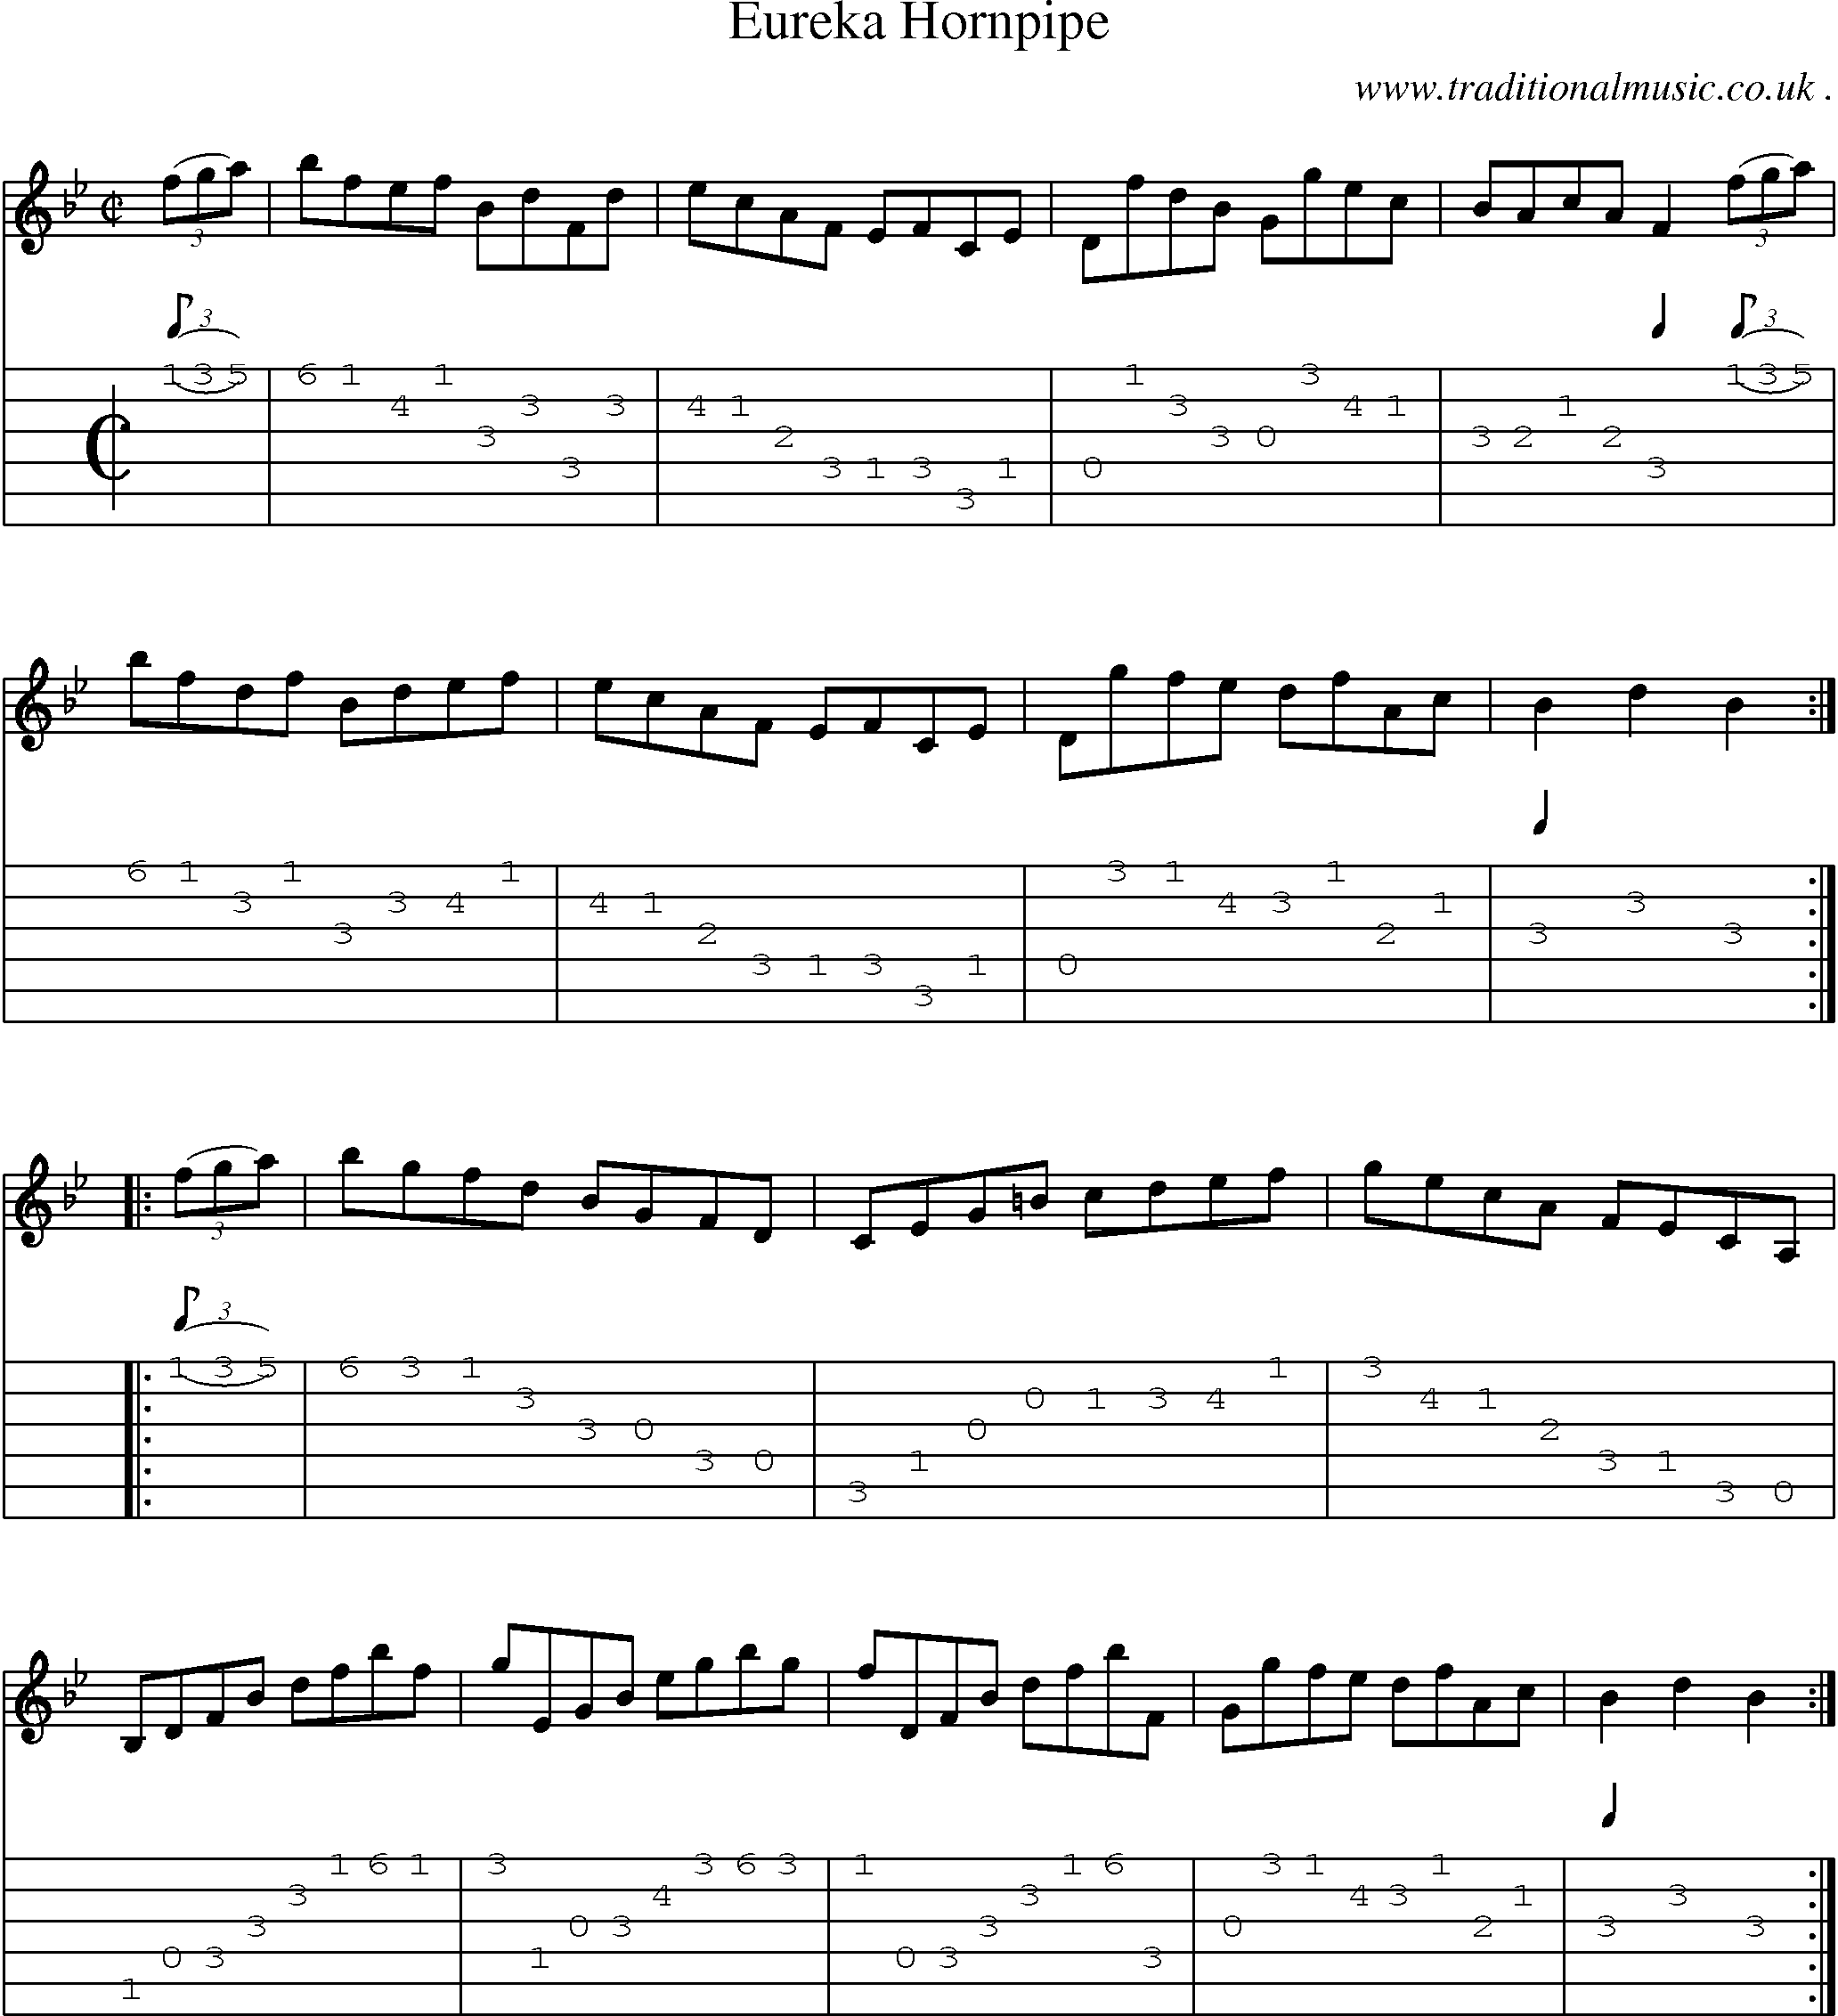 Sheet-Music and Guitar Tabs for Eureka Hornpipe